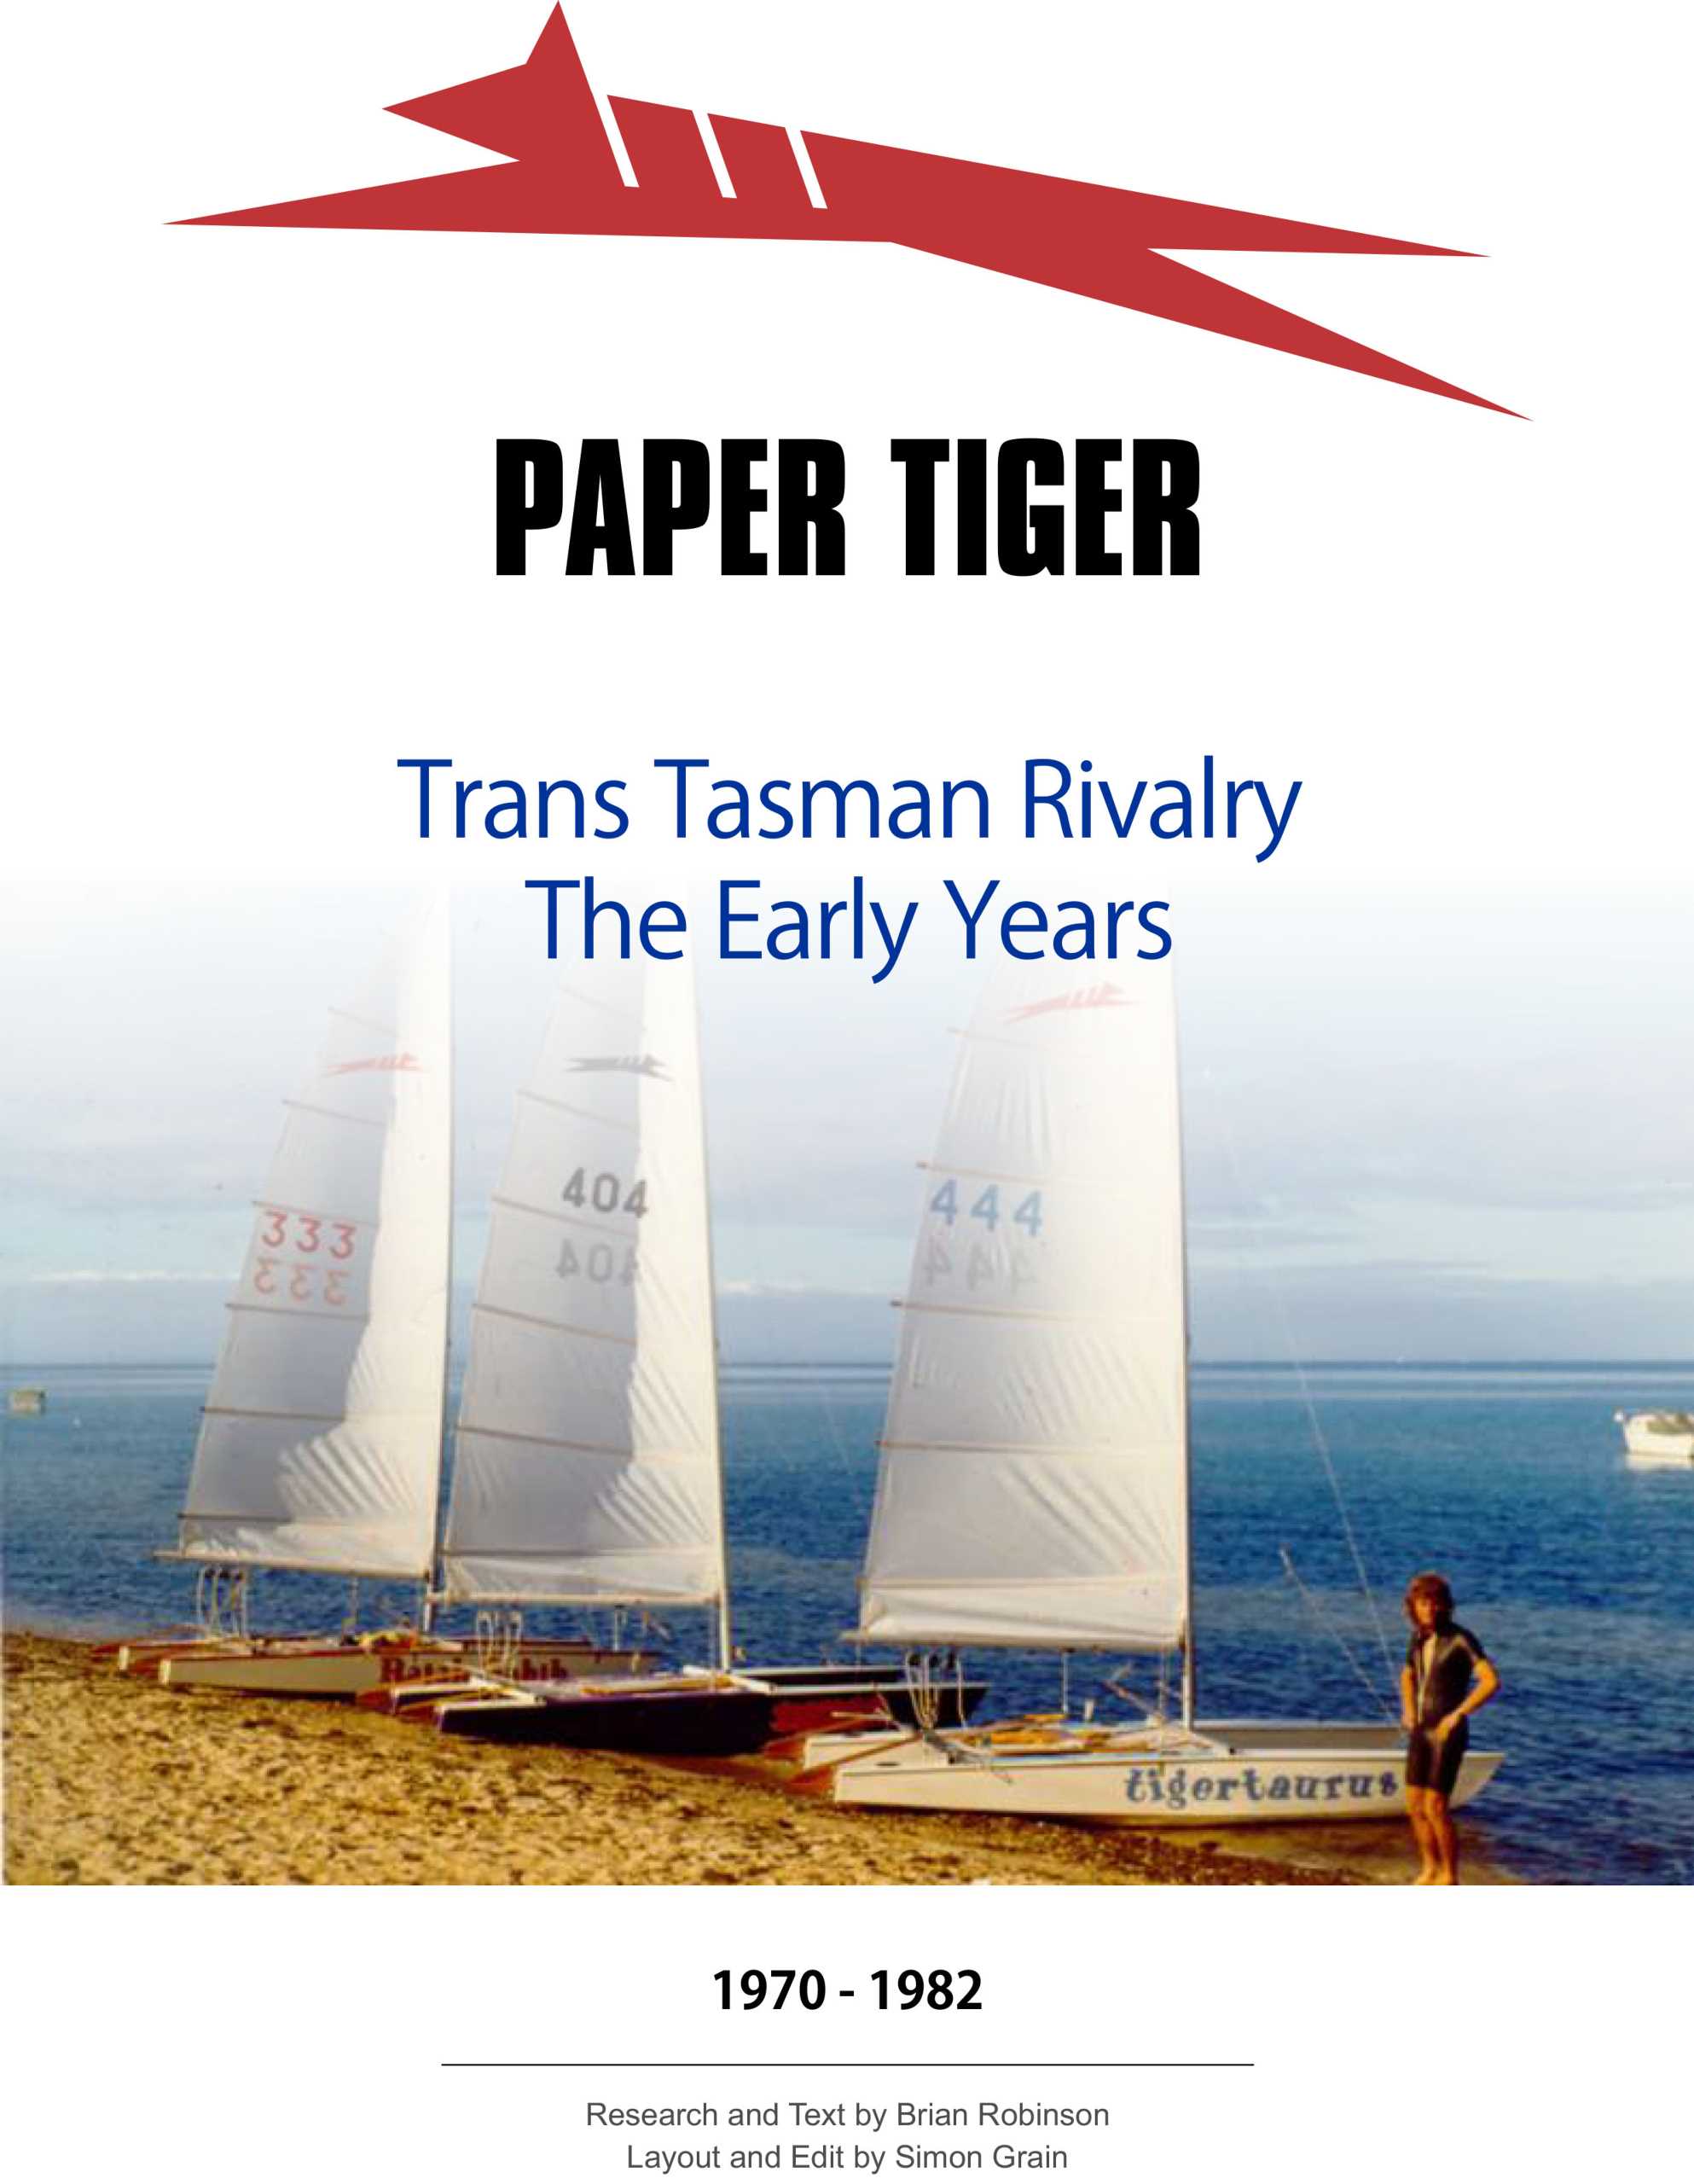 PT Trans Tasman Rivalry -  The Early Years Edition 2.cdr